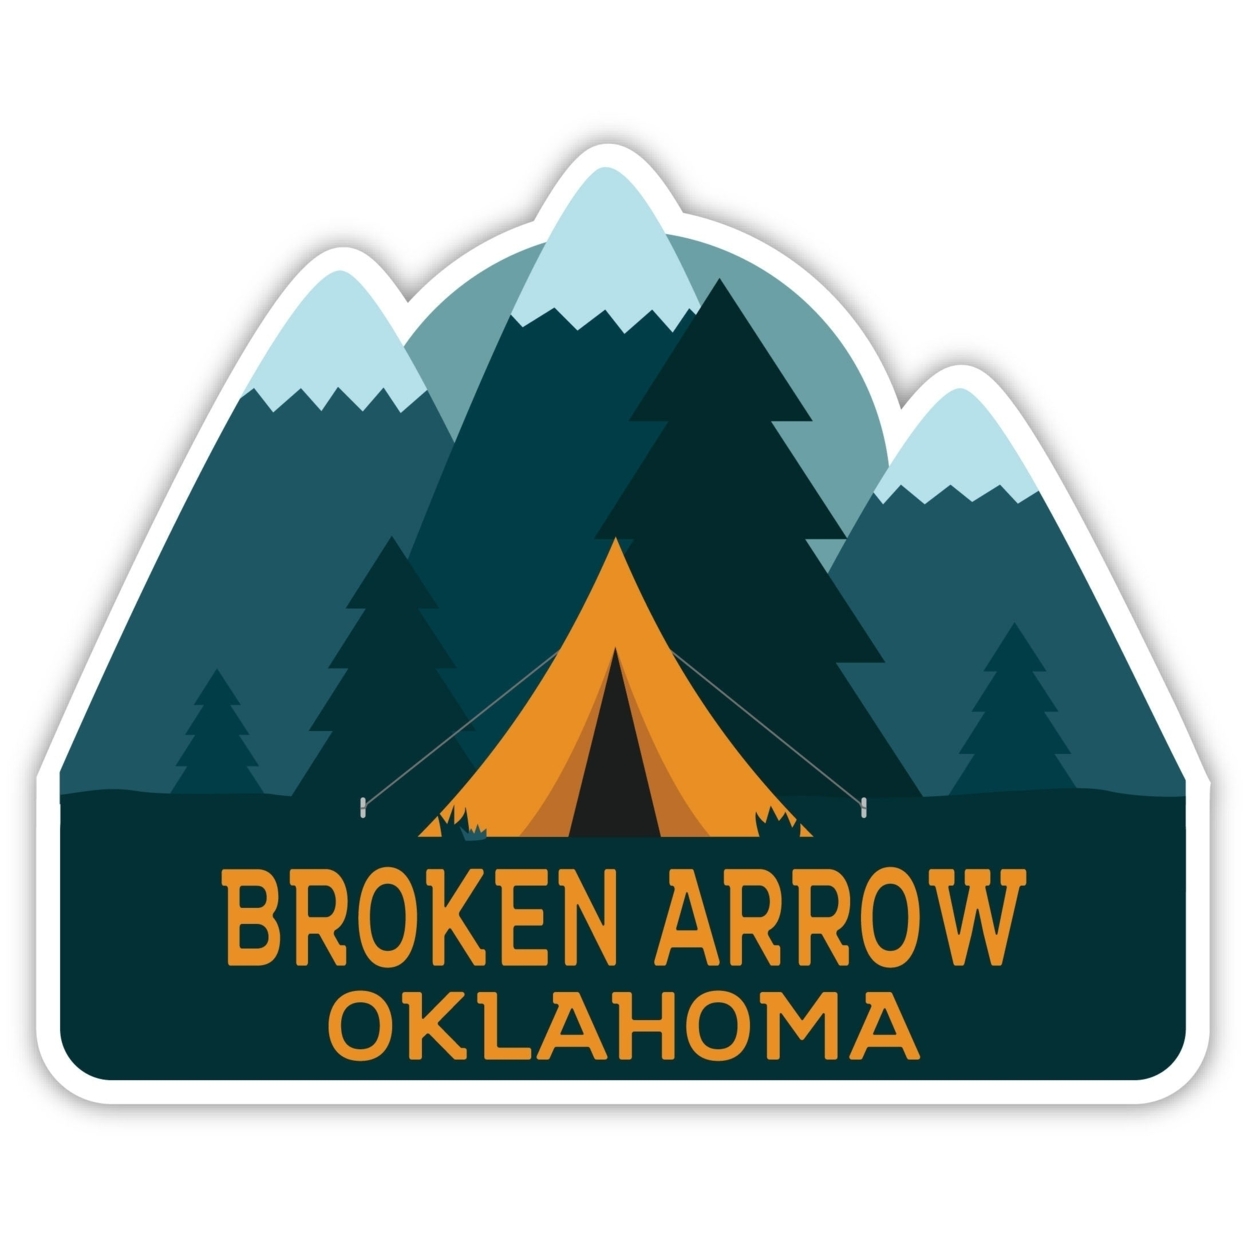 Broken Arrow Oklahoma Souvenir Decorative Stickers (Choose Theme And Size) - 4-Pack, 4-Inch, Tent